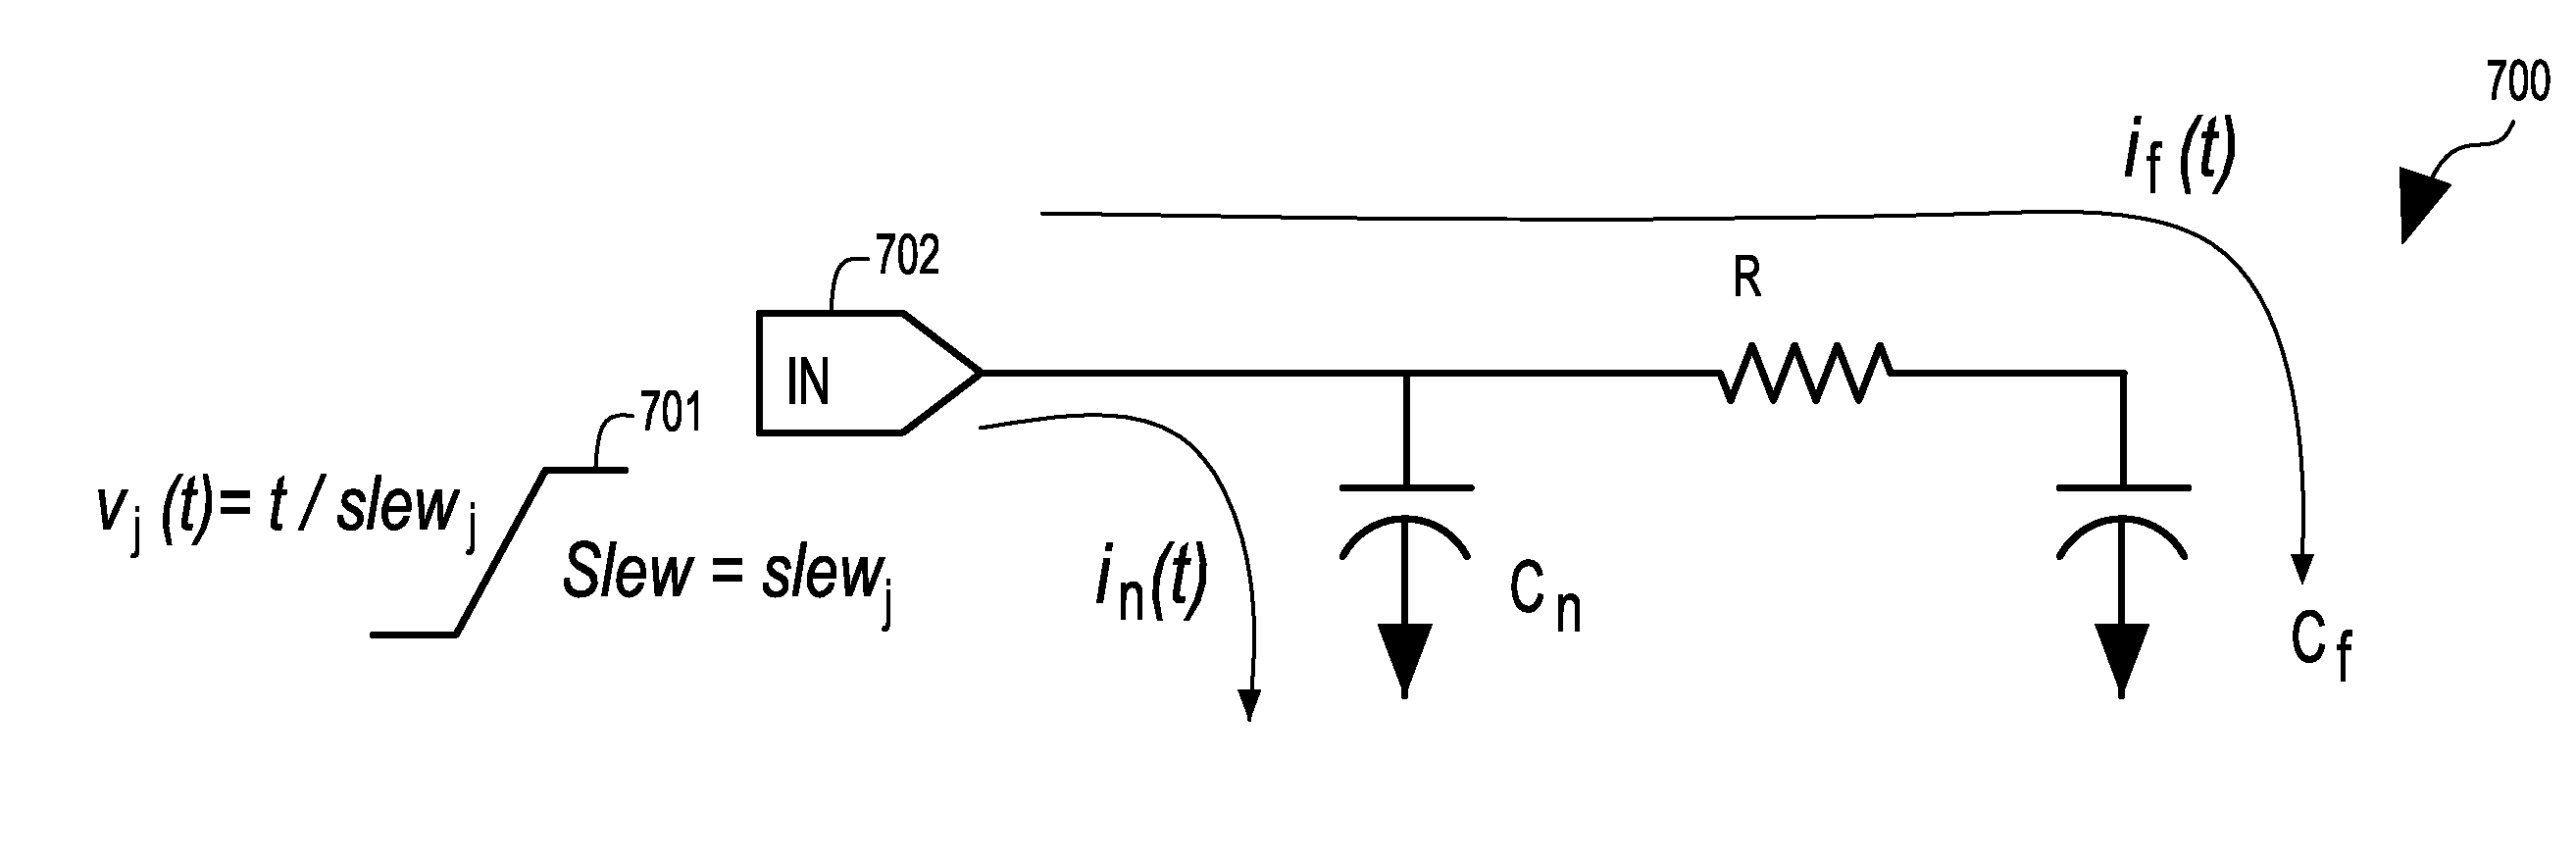 Method of Employing Slew Dependent Pin Capacitances to Capture Interconnect Parasitics During Timing Abstraction of VLSI Circuits